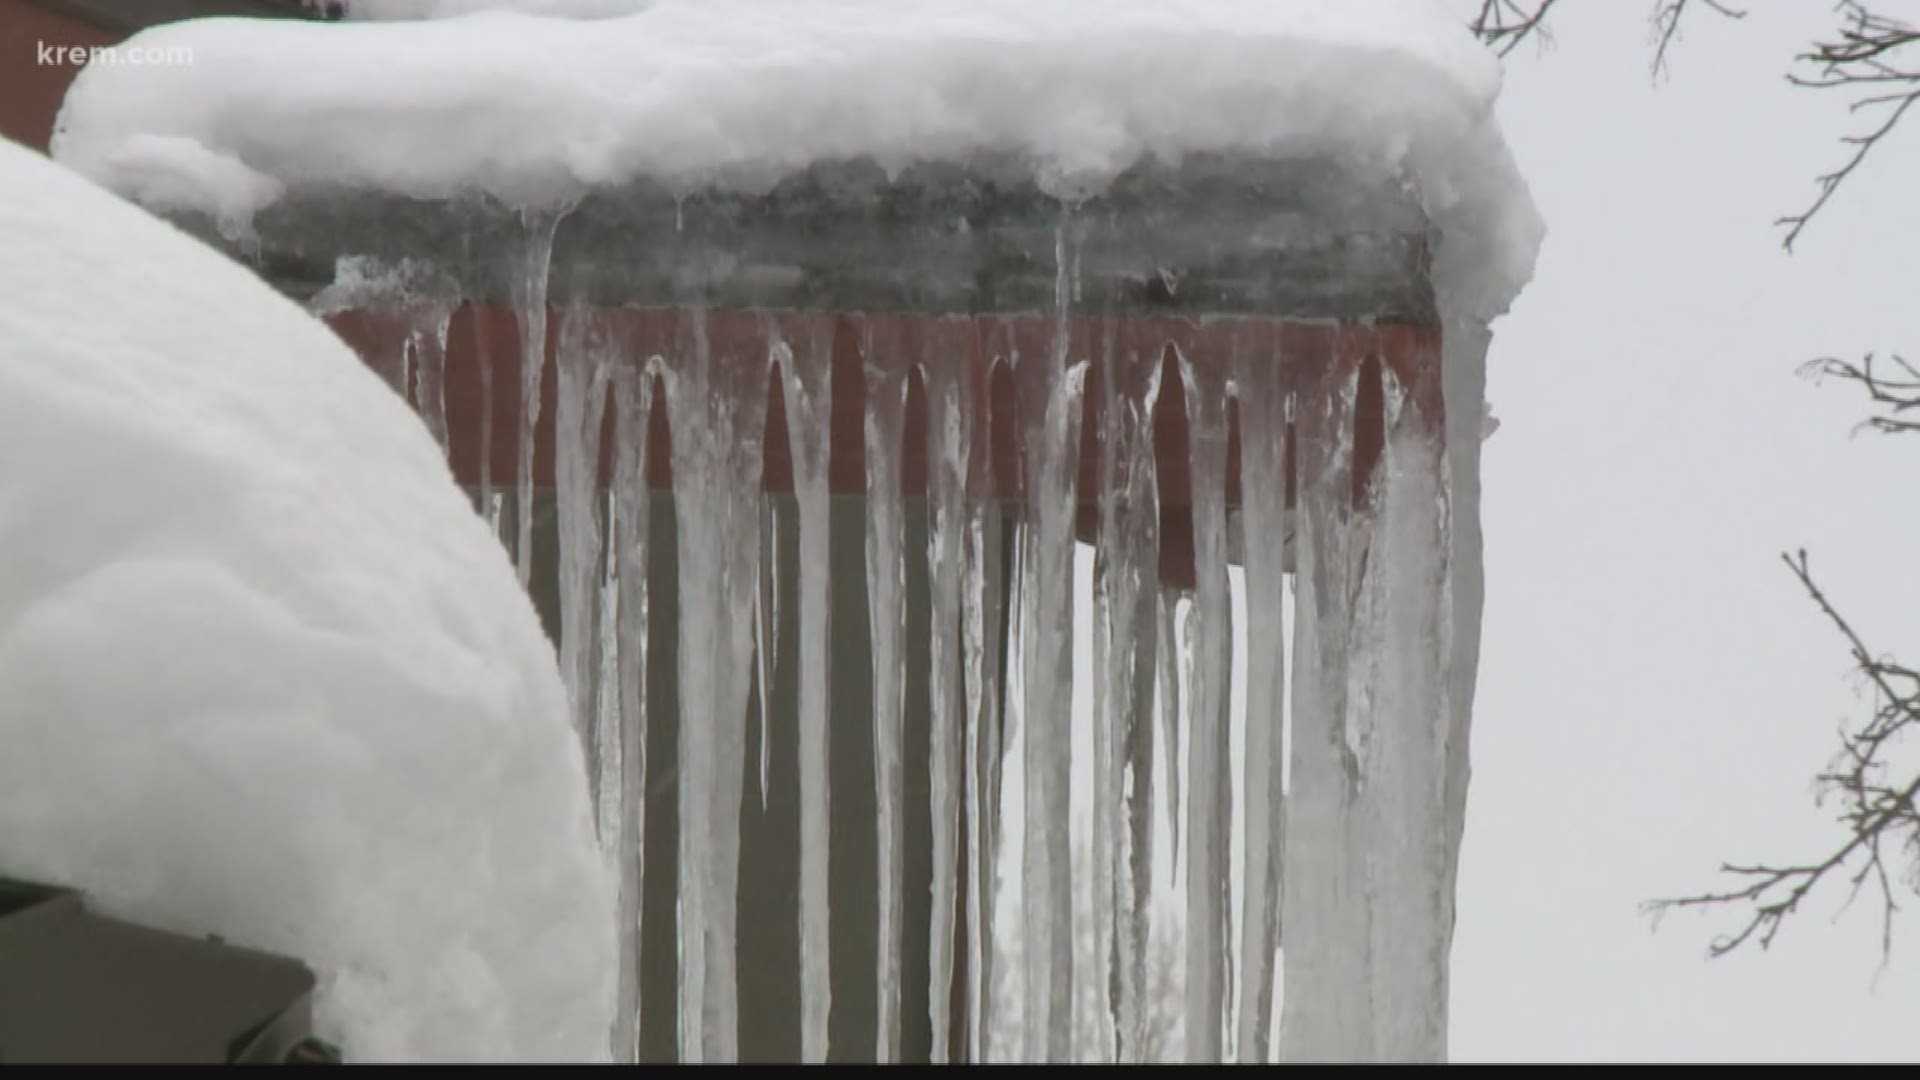 KREM Reporter Shayna Waltower spoke with local experts on whether those icicles hanging from you house are dangerous.